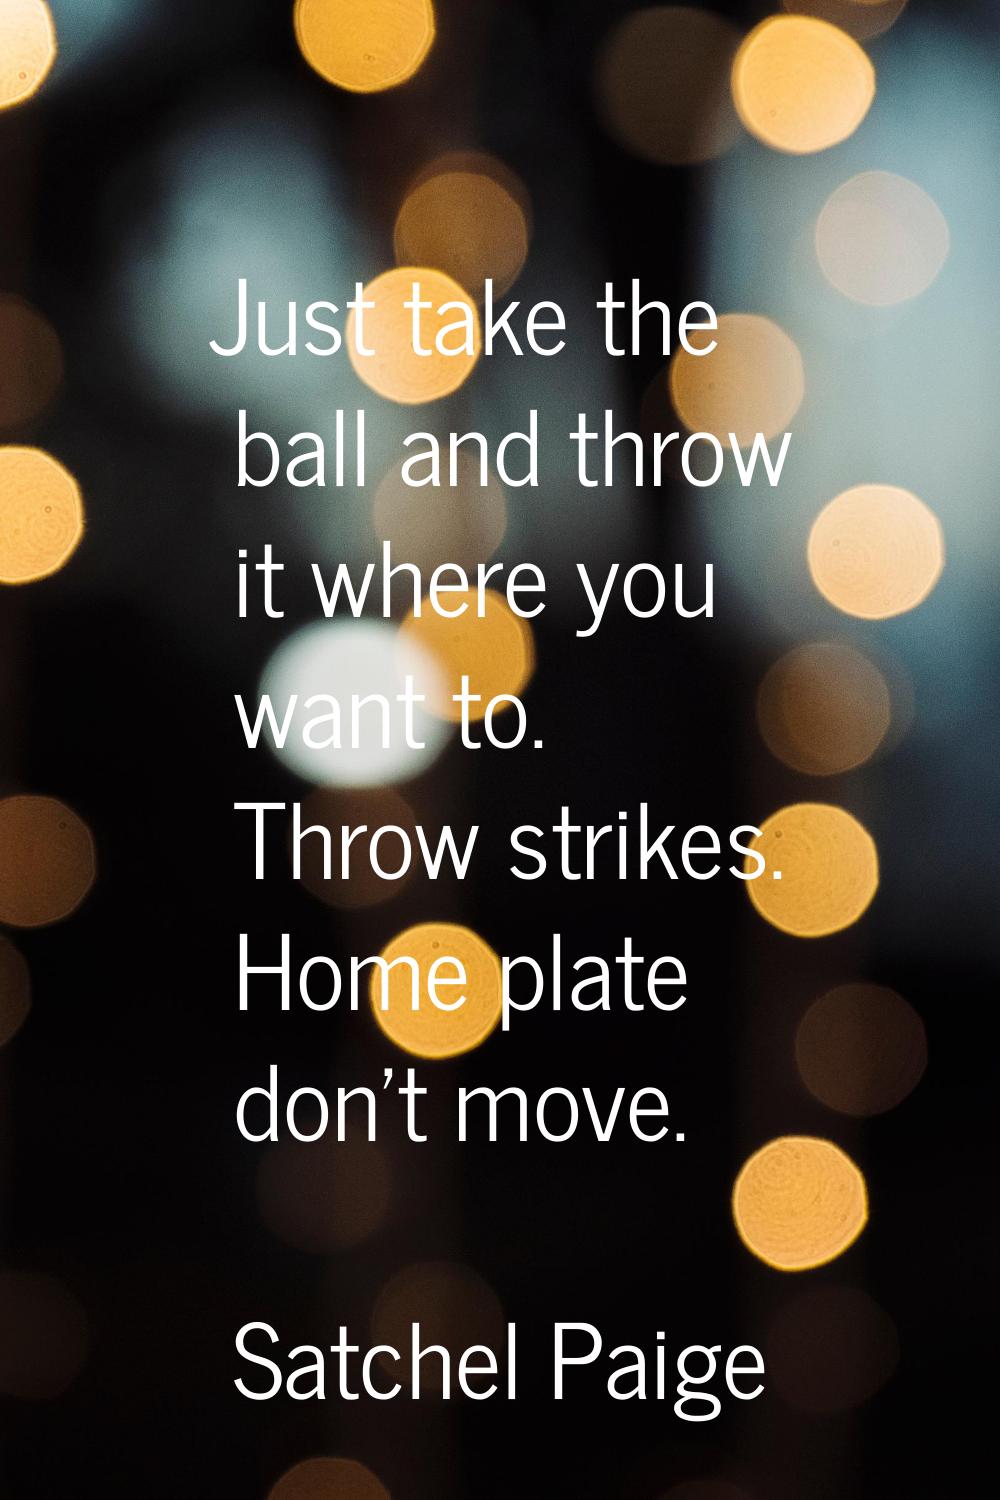 Just take the ball and throw it where you want to. Throw strikes. Home plate don't move.